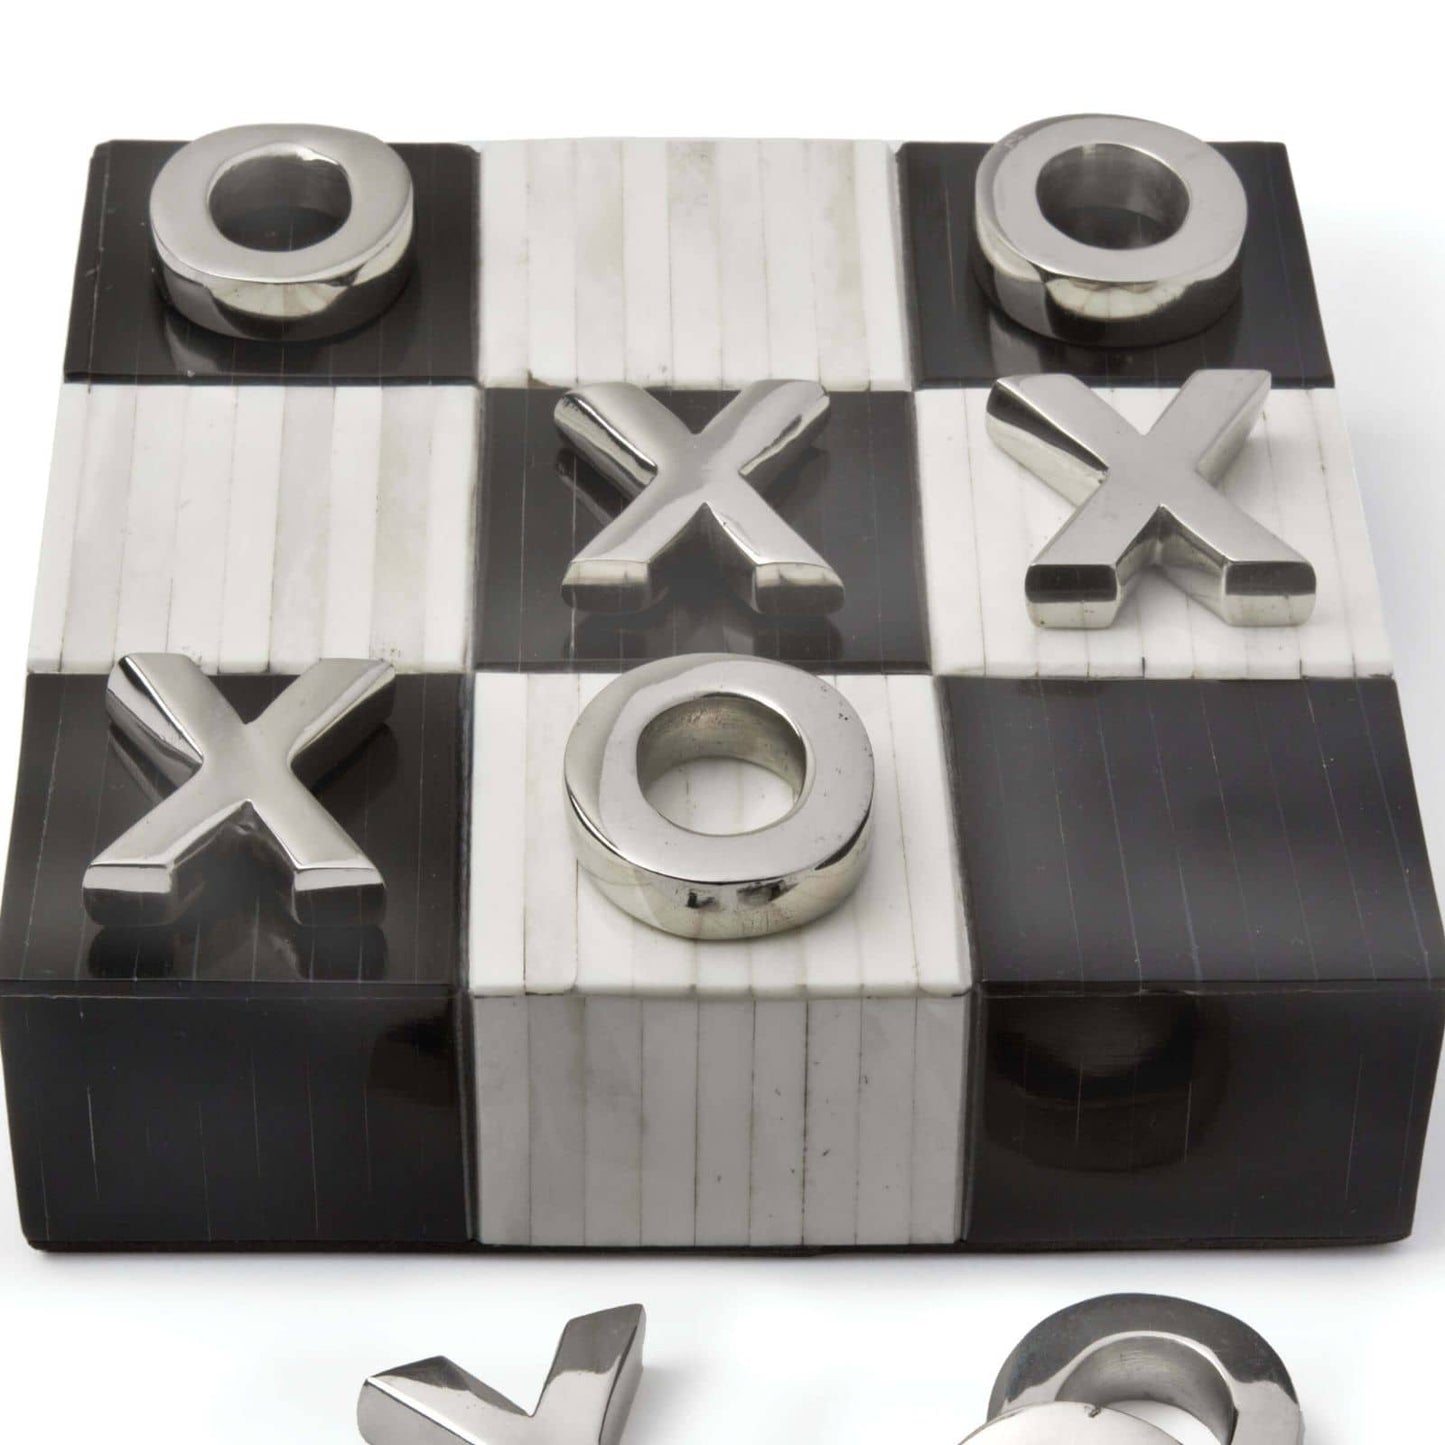 Tic Tac Toe Flat Board With Nickel Pieces by Regina Andrew